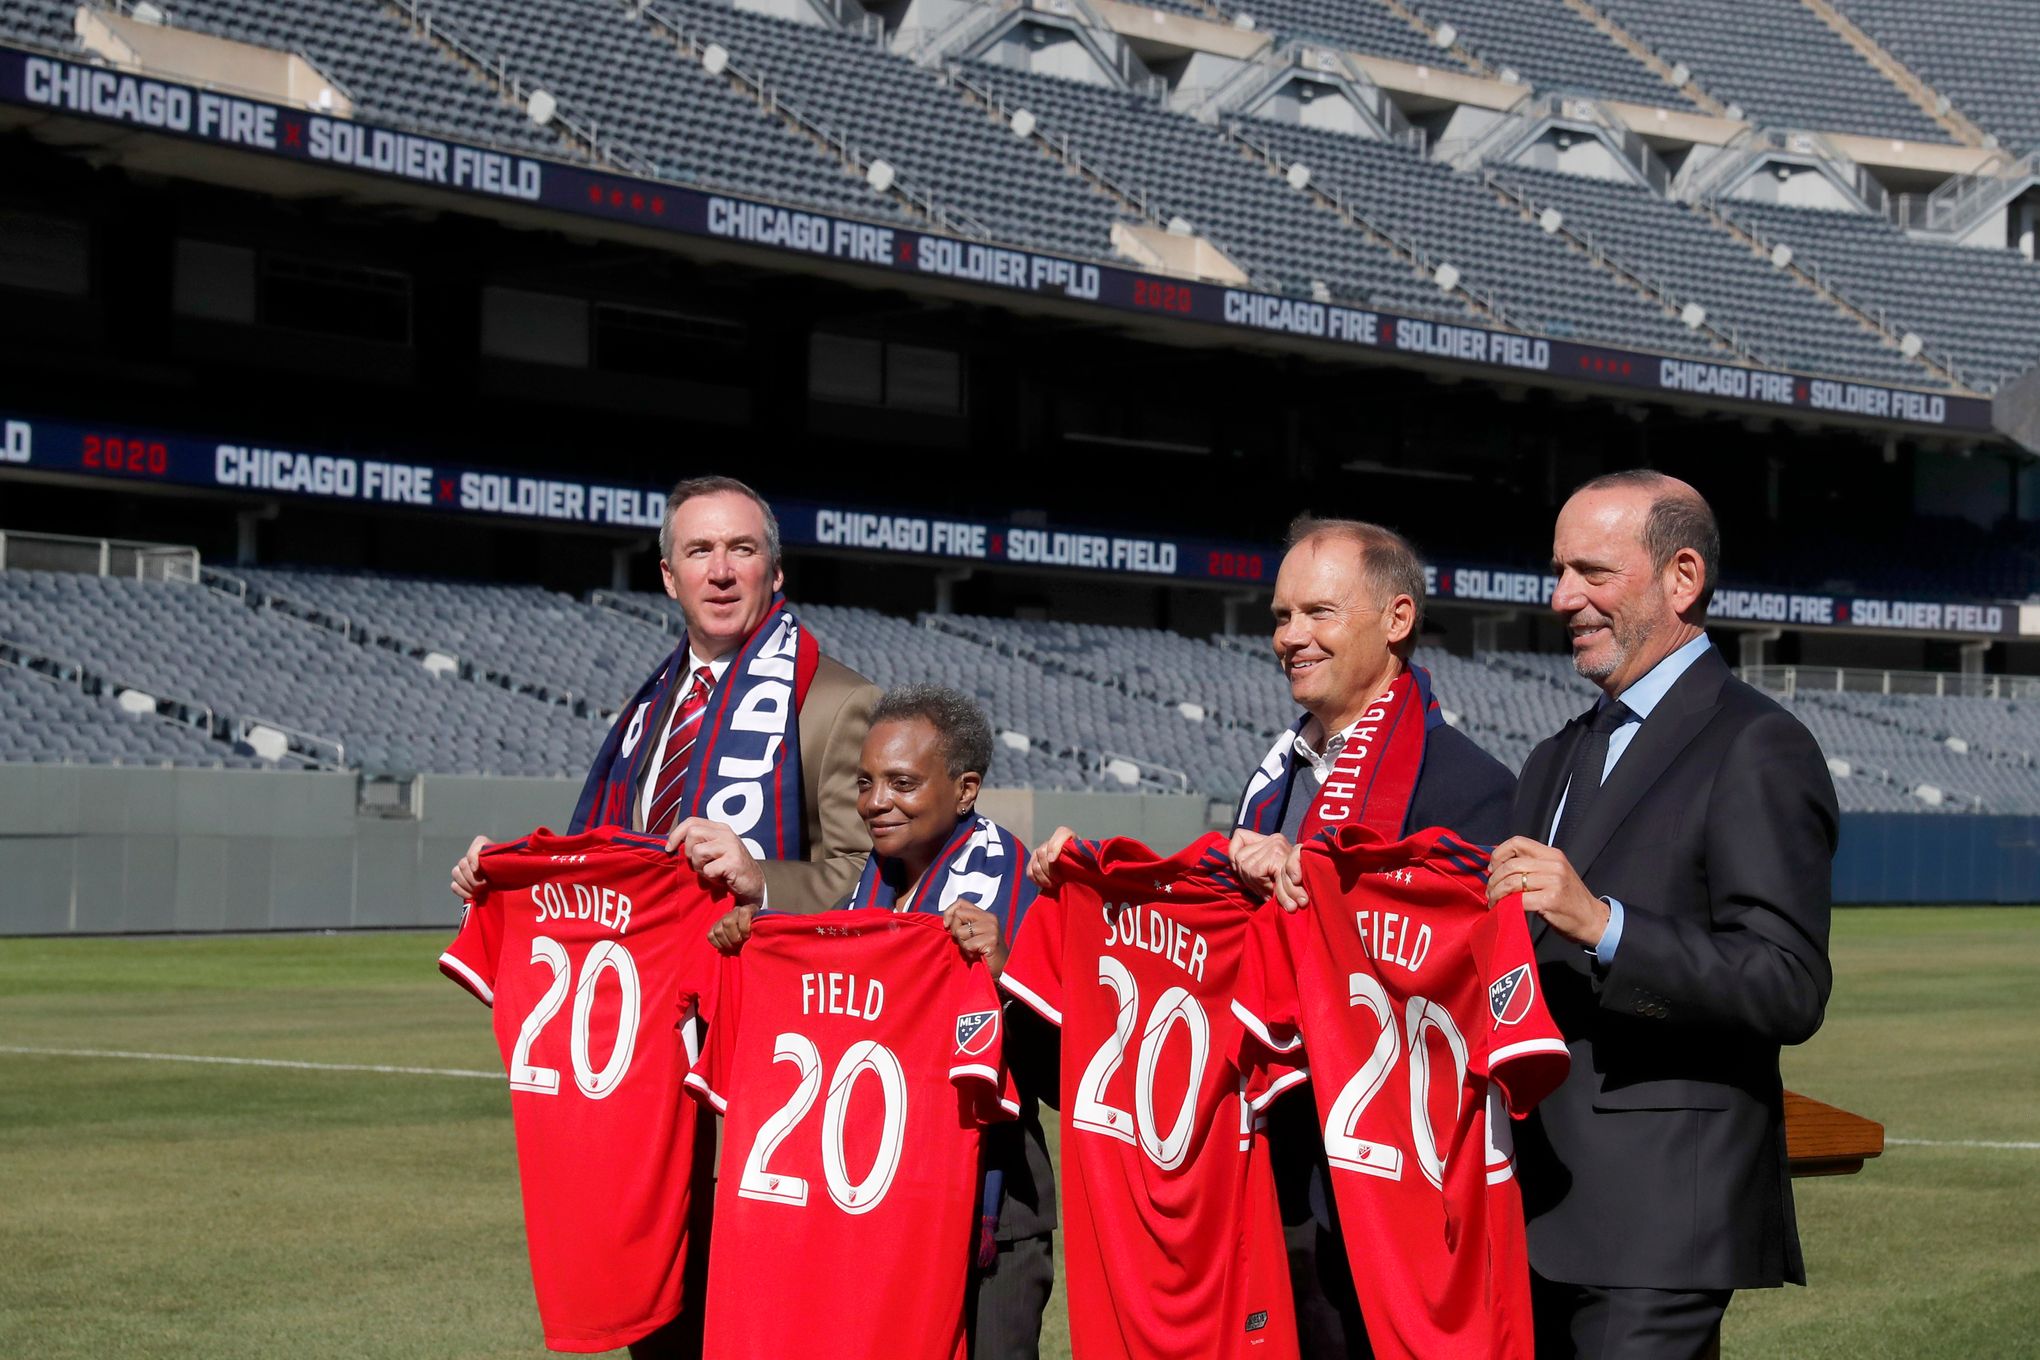 Chicago Fire's new threads for - Major League Soccer (MLS